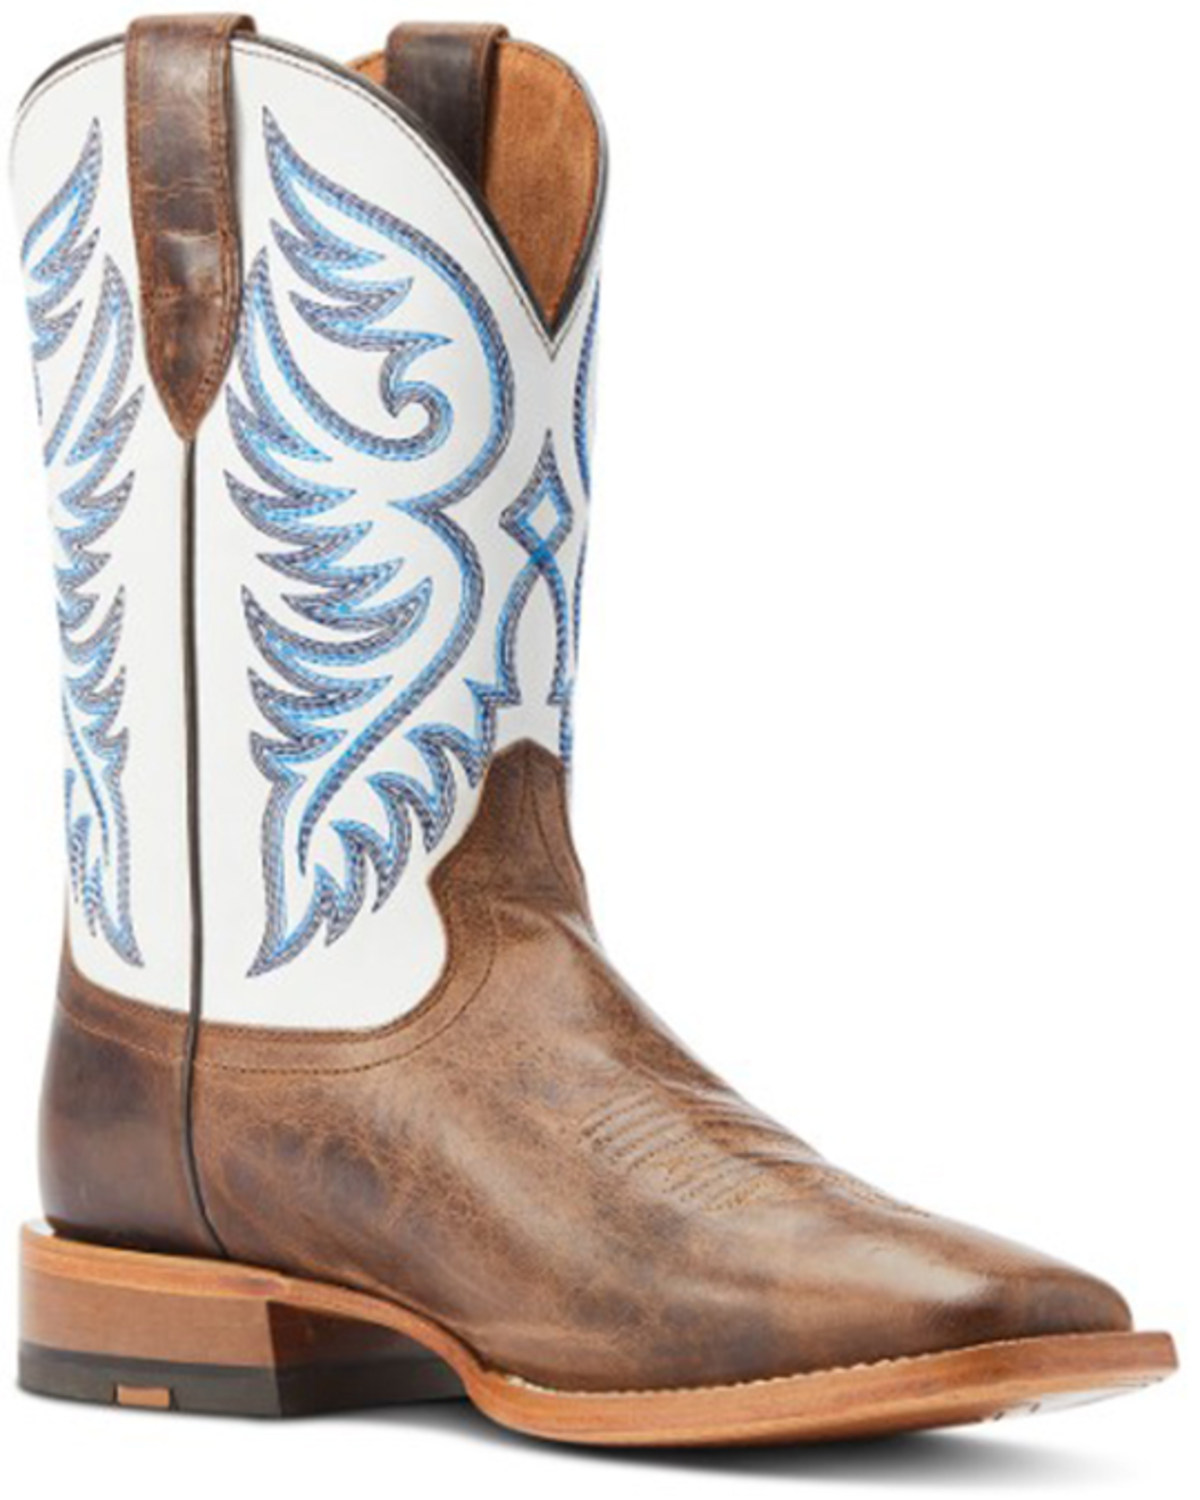 Ariat Men's Wiley Western Boots - Broad Square Toe